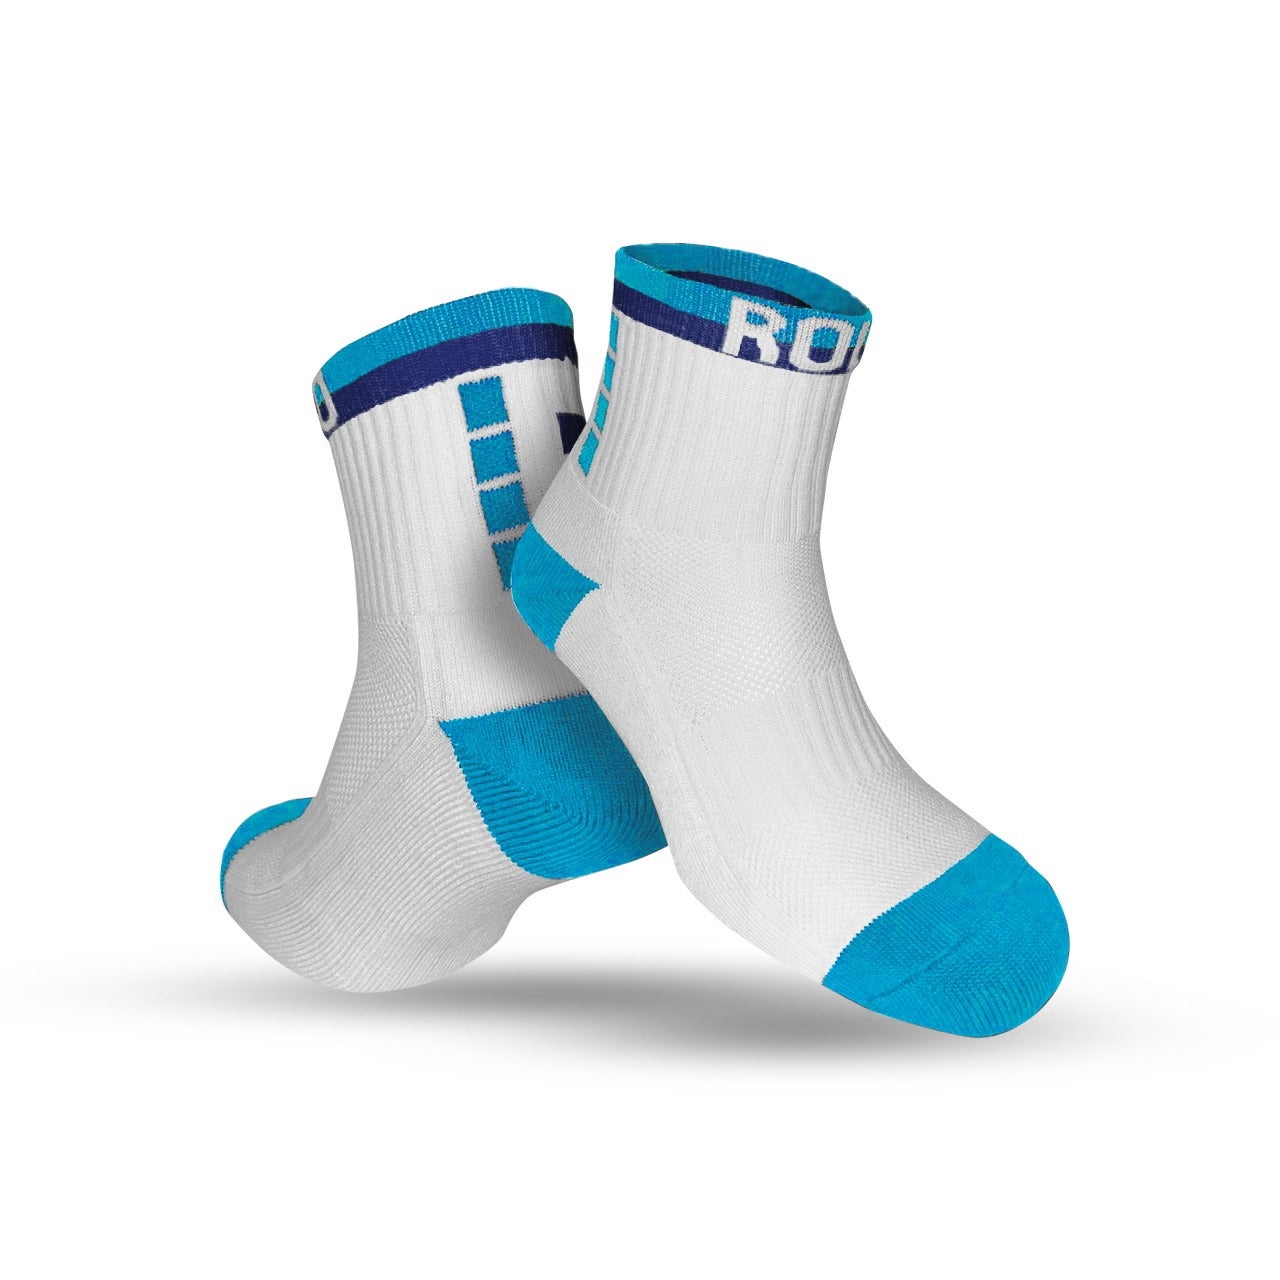 Low Rise Cushioned Ankle Socks - Sky Blue/Navy/White